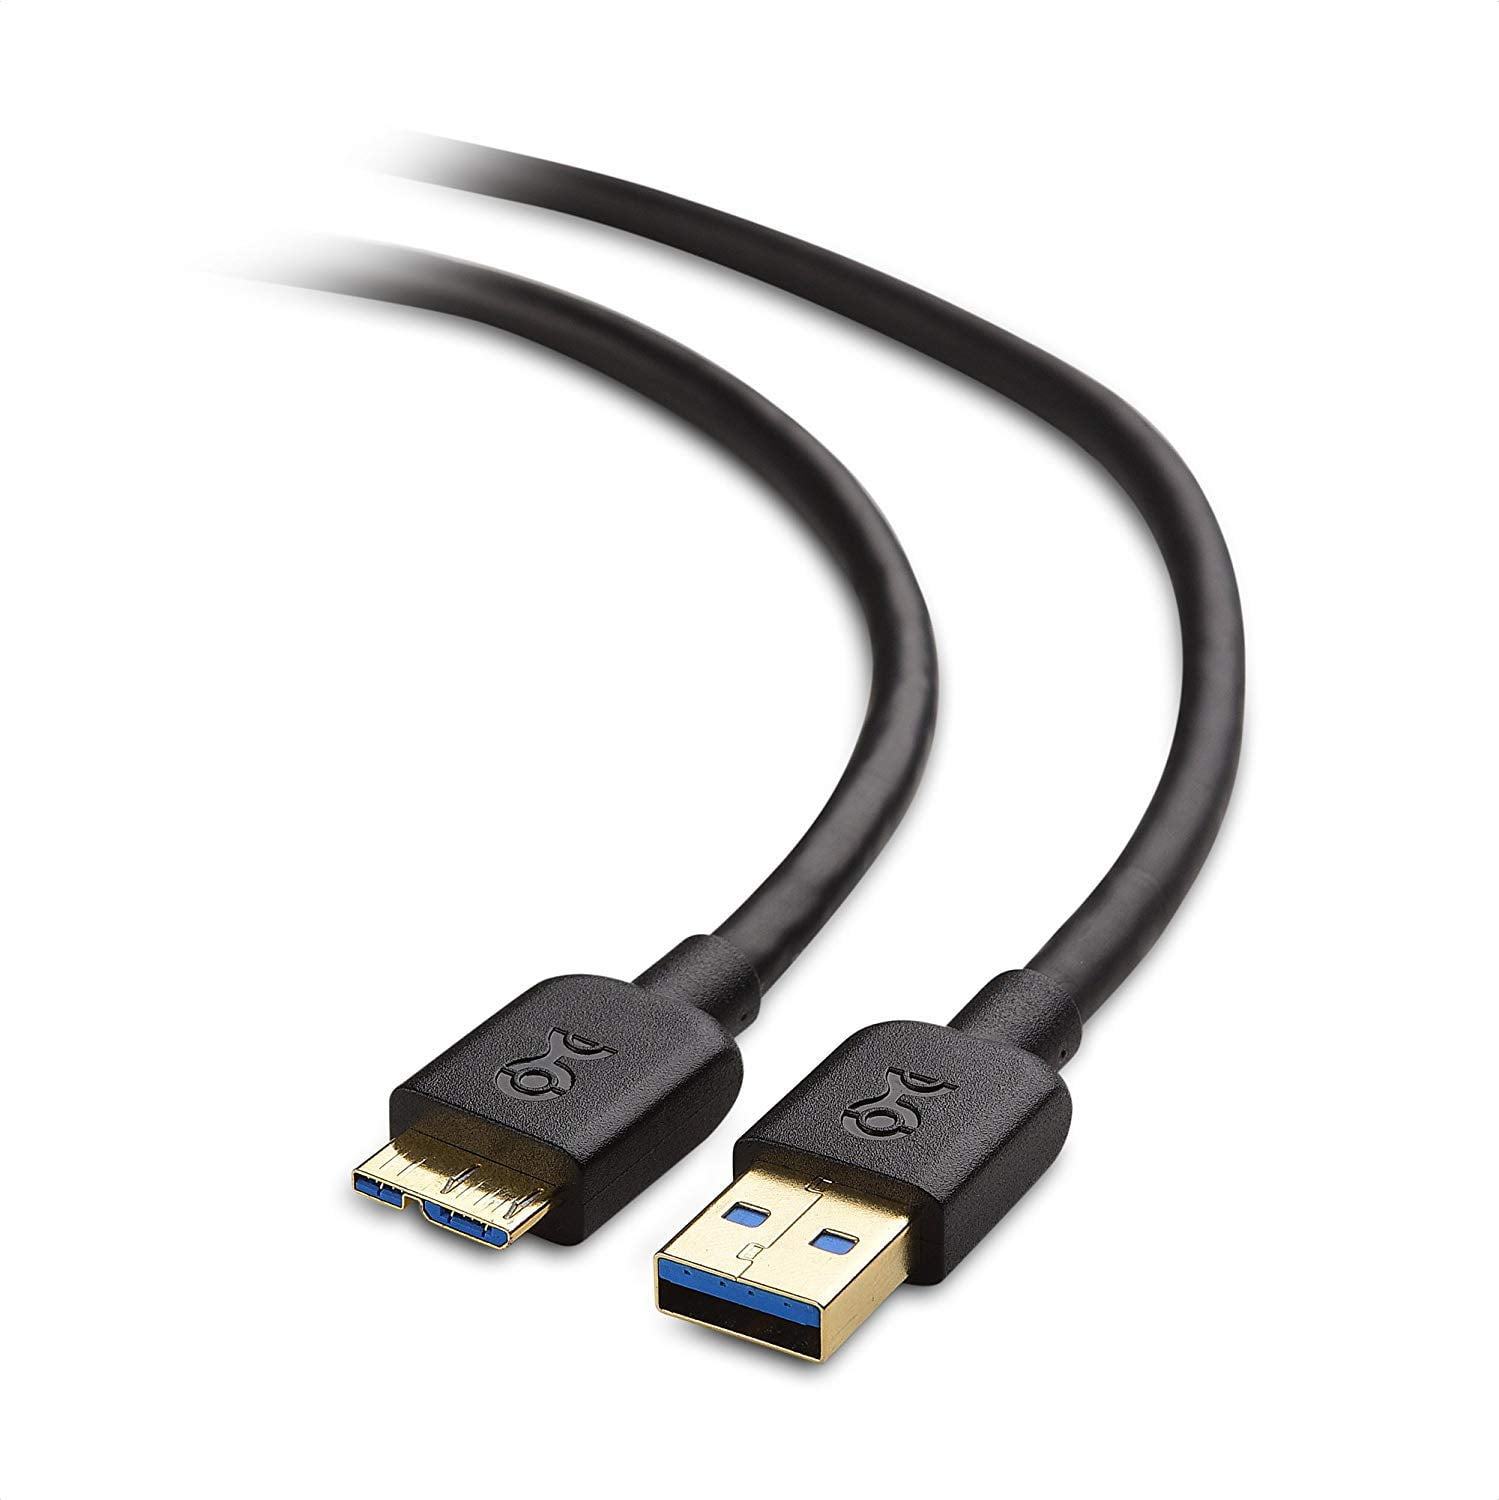 Cable Matters Long Micro USB 3.0 Cable to USB B Cable) in Black 10 ft - Walmart.com